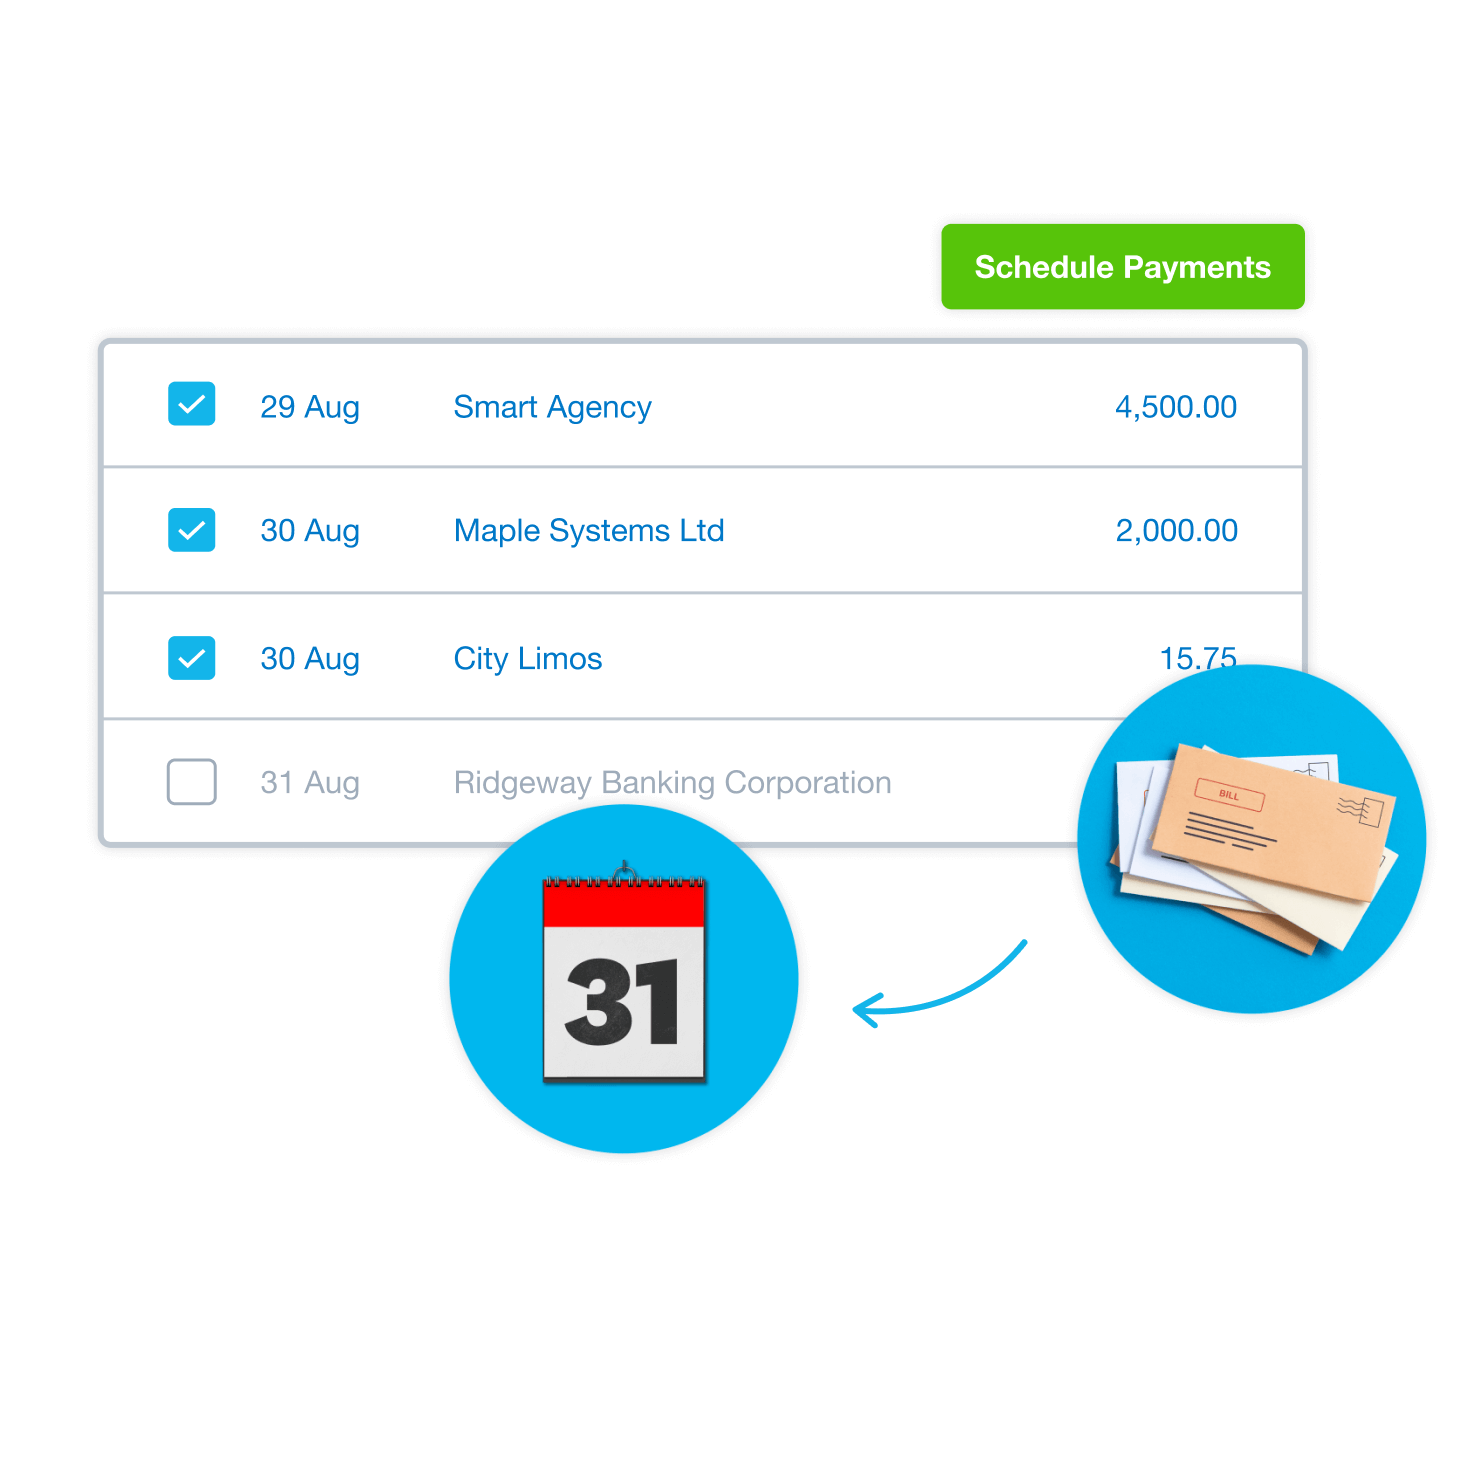 Xero’s accounting software for freelancers and sole traders shows a list of bills for payment along with due dates.